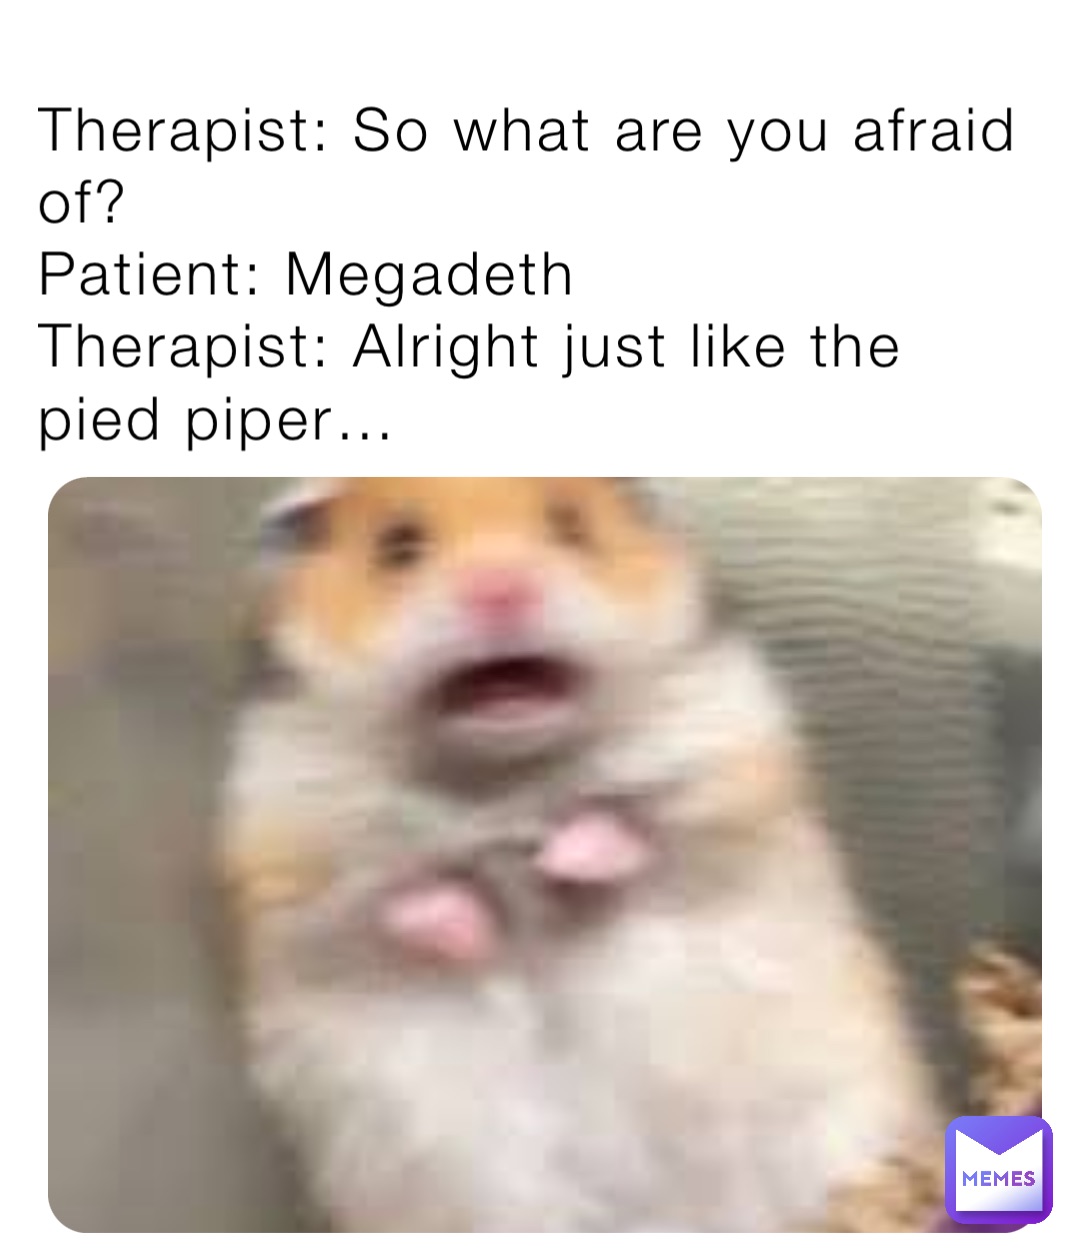 Therapist: So what are you afraid of?
Patient: Megadeth
Therapist: Alright just like the pied piper…